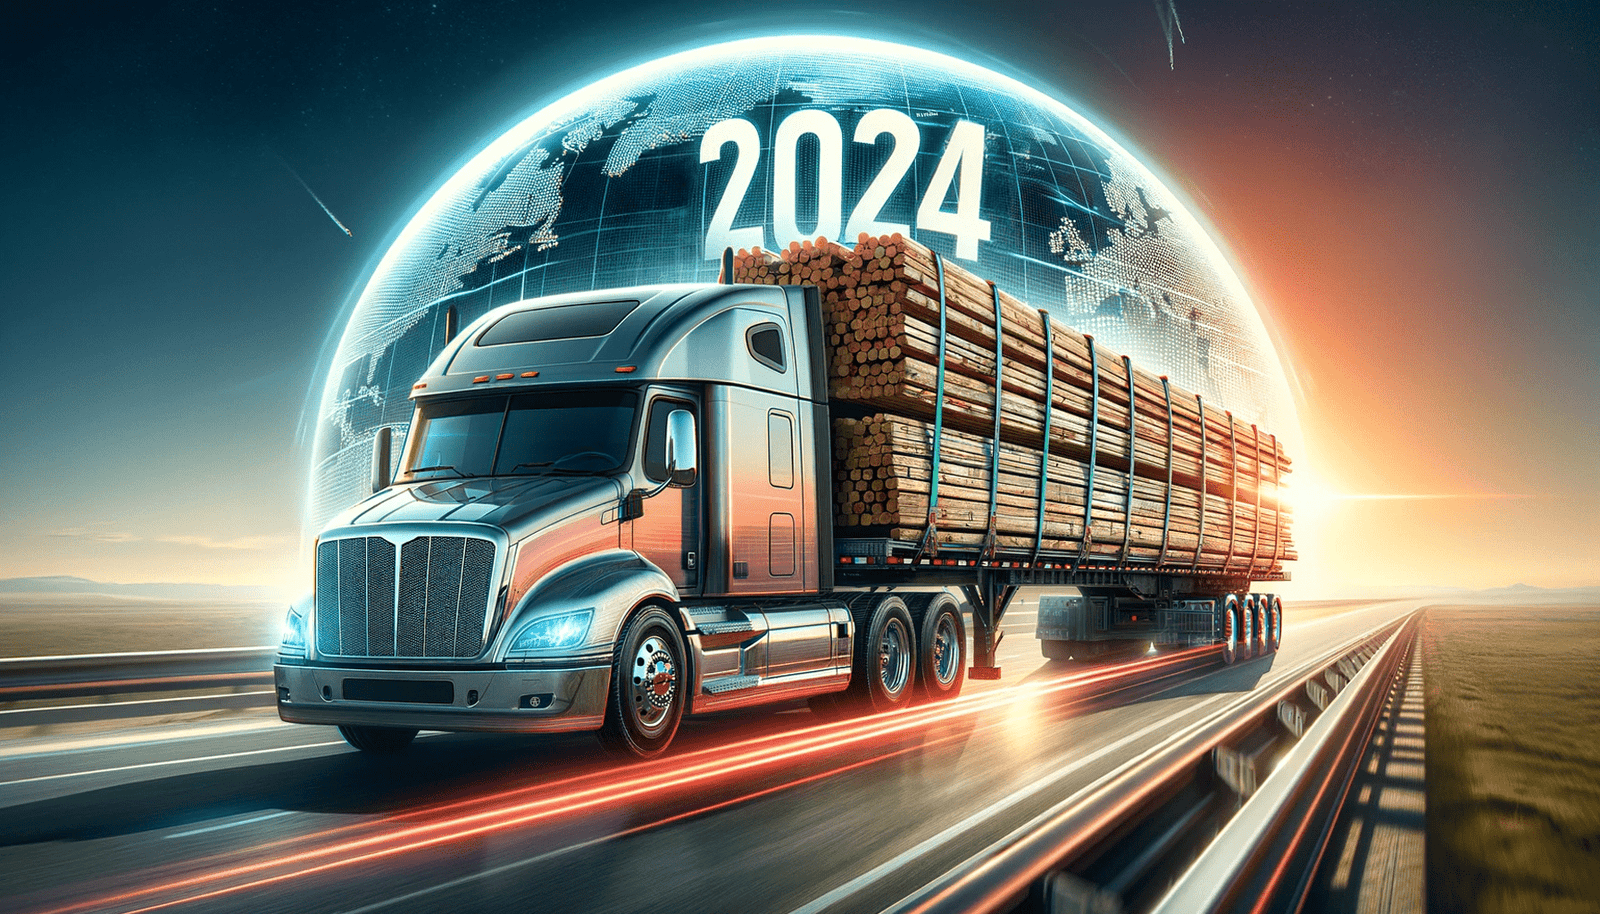 2024: The Year Trucking Takes Off! Discover How Tarps4Less is Powering the Surge with Top-Grade Tarps and Cargo Controls - Tarps4Less